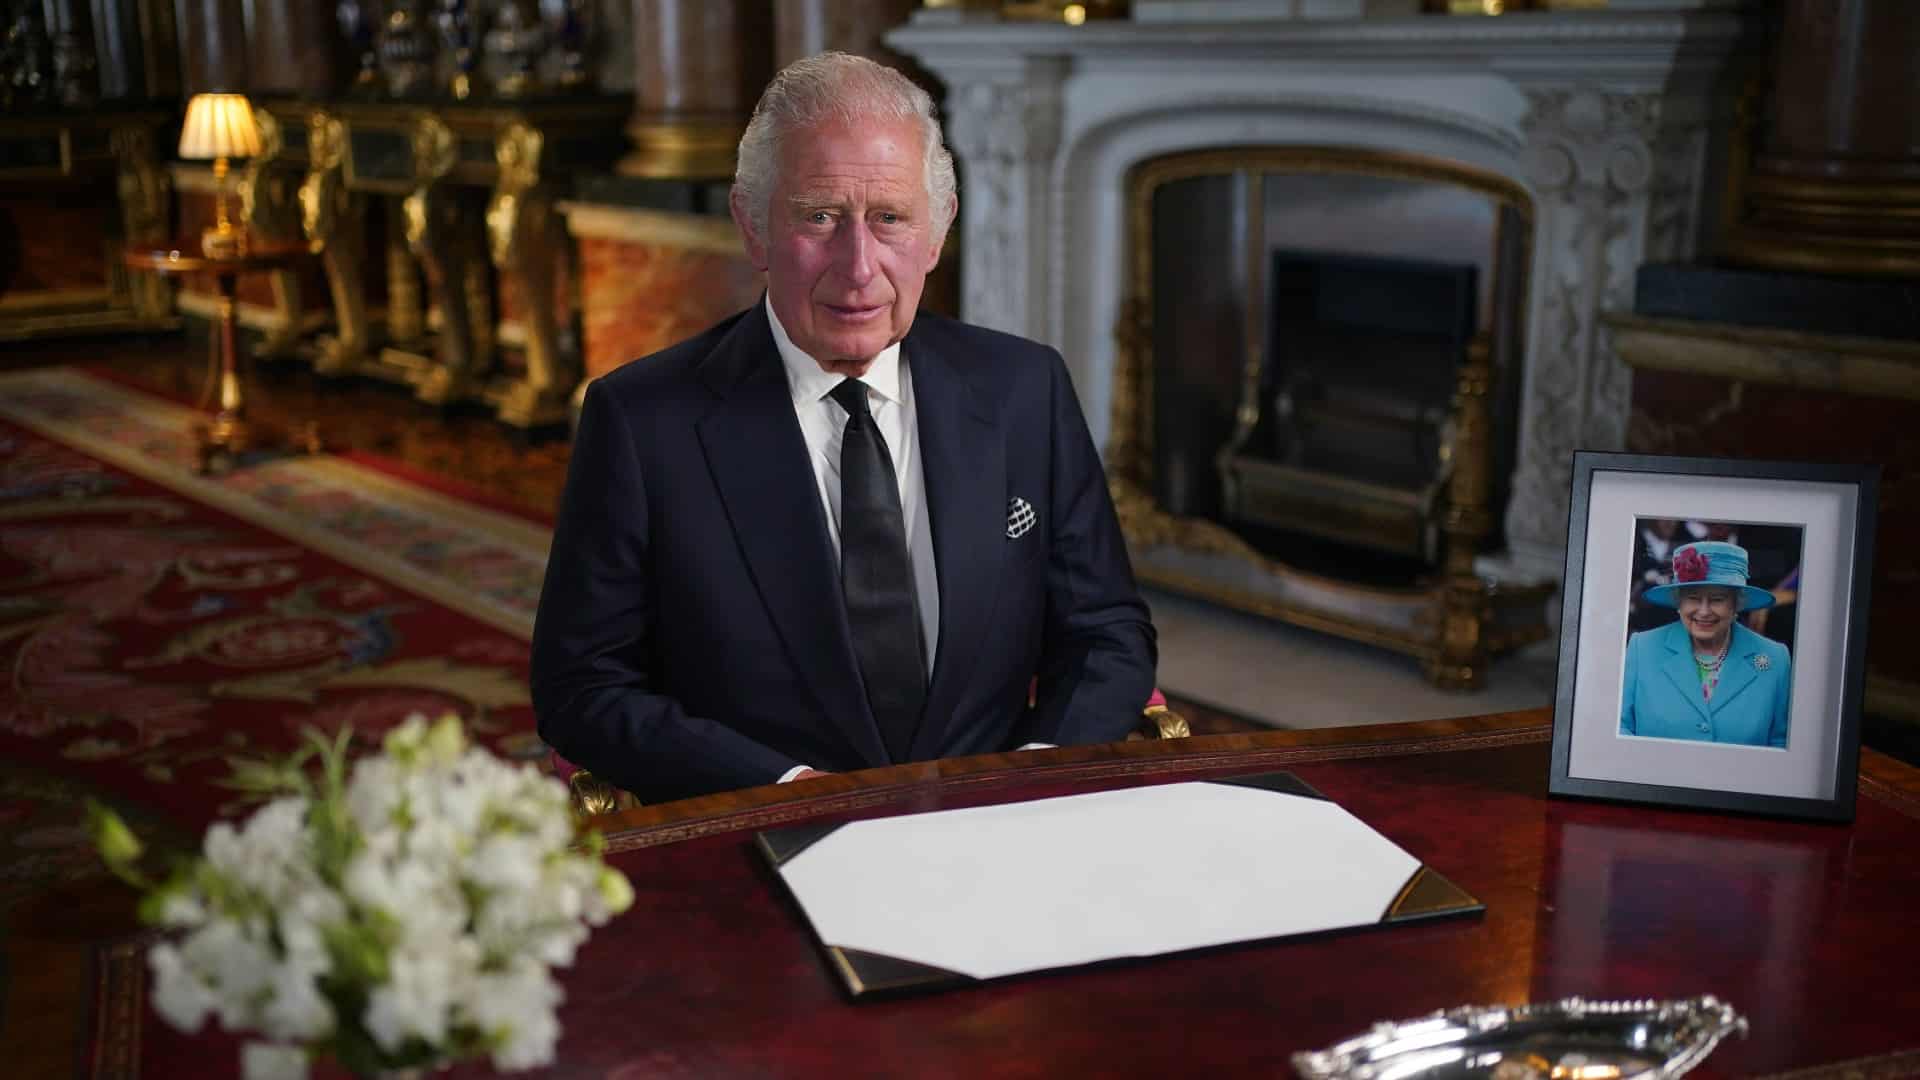 This is the reason King Charles III dismissed 100 workers at a ceremony honoring Queen Elizabeth II